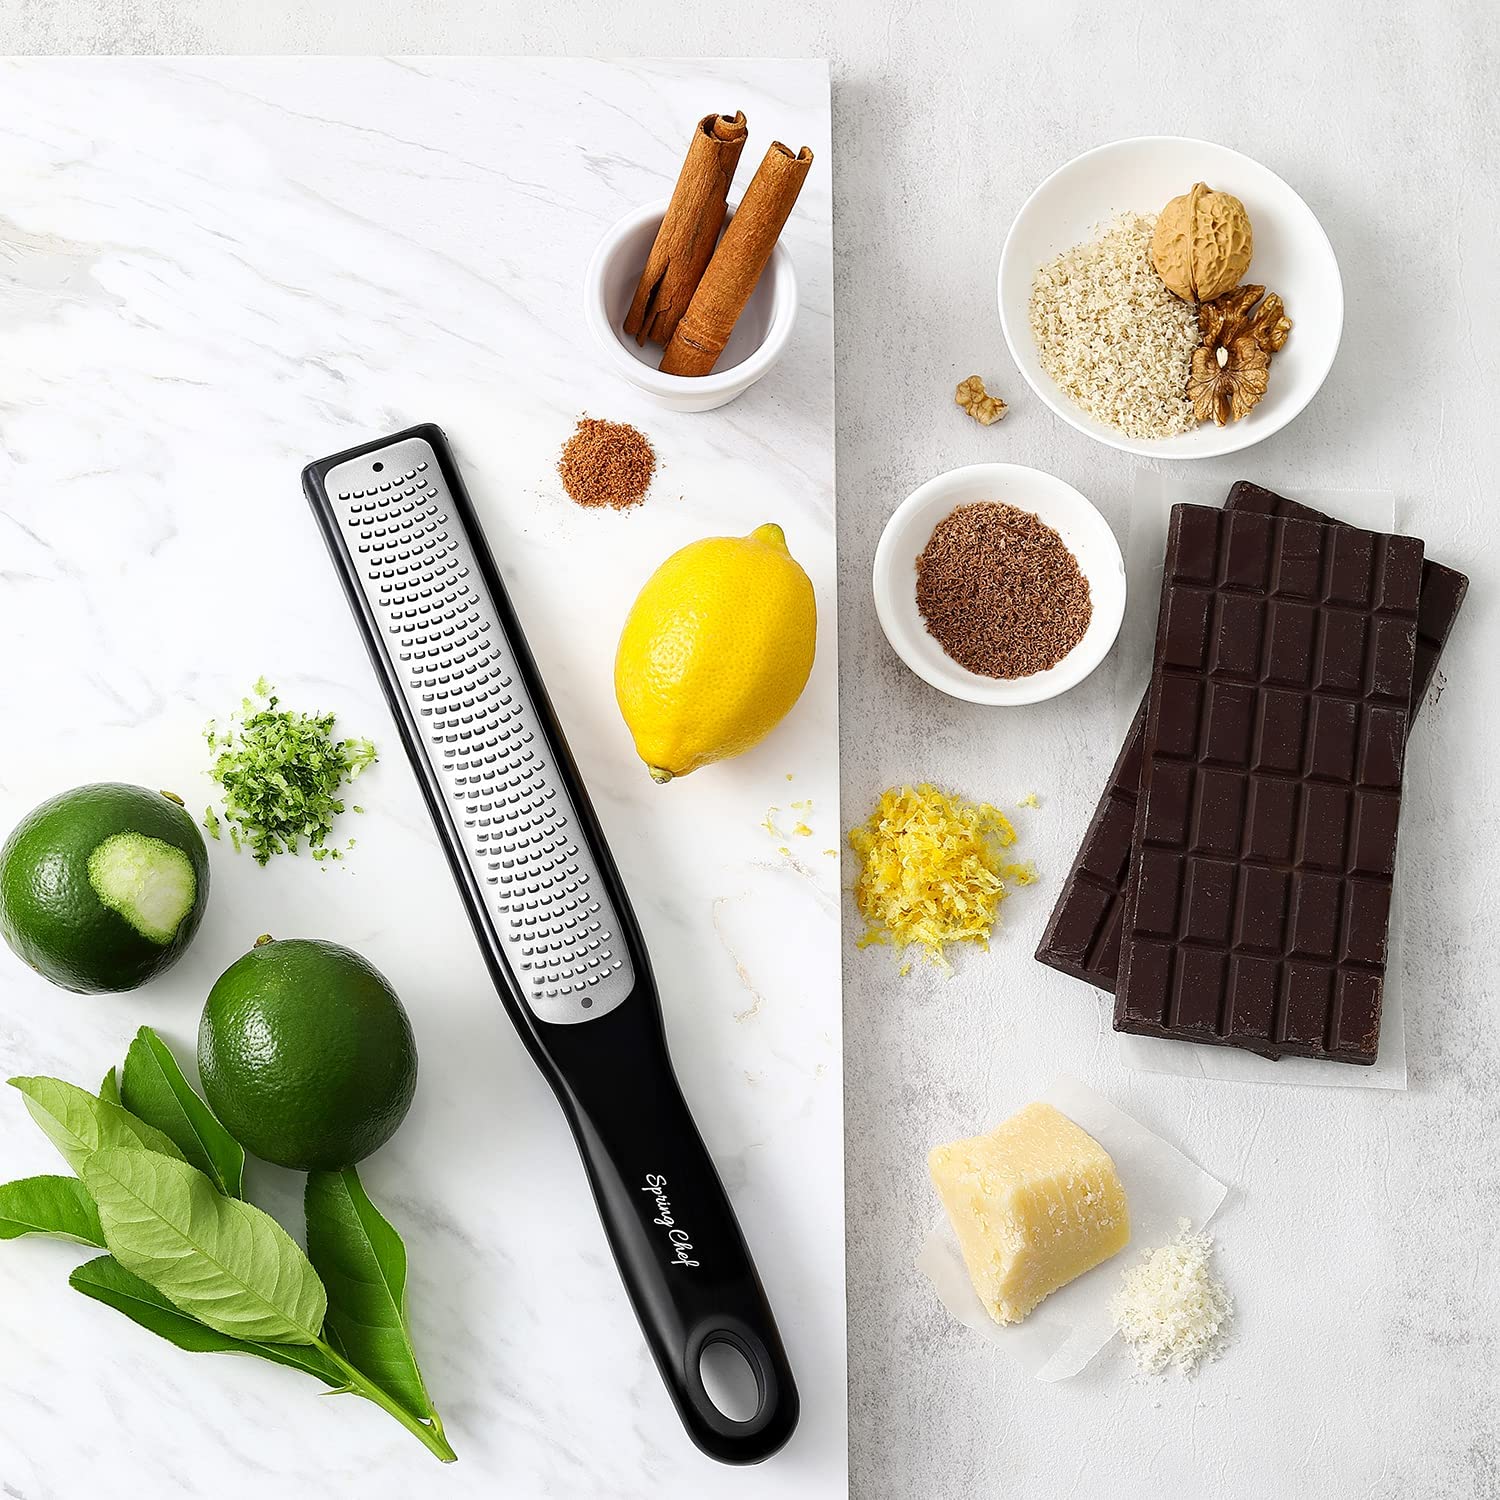 Professional Straight Hand Grater & Zester - Stainless Steel Construction.  Dishwasher Safe. For Hard Cheese, Lemon, Lime, Chocolate, Nutmeg, Garlic 